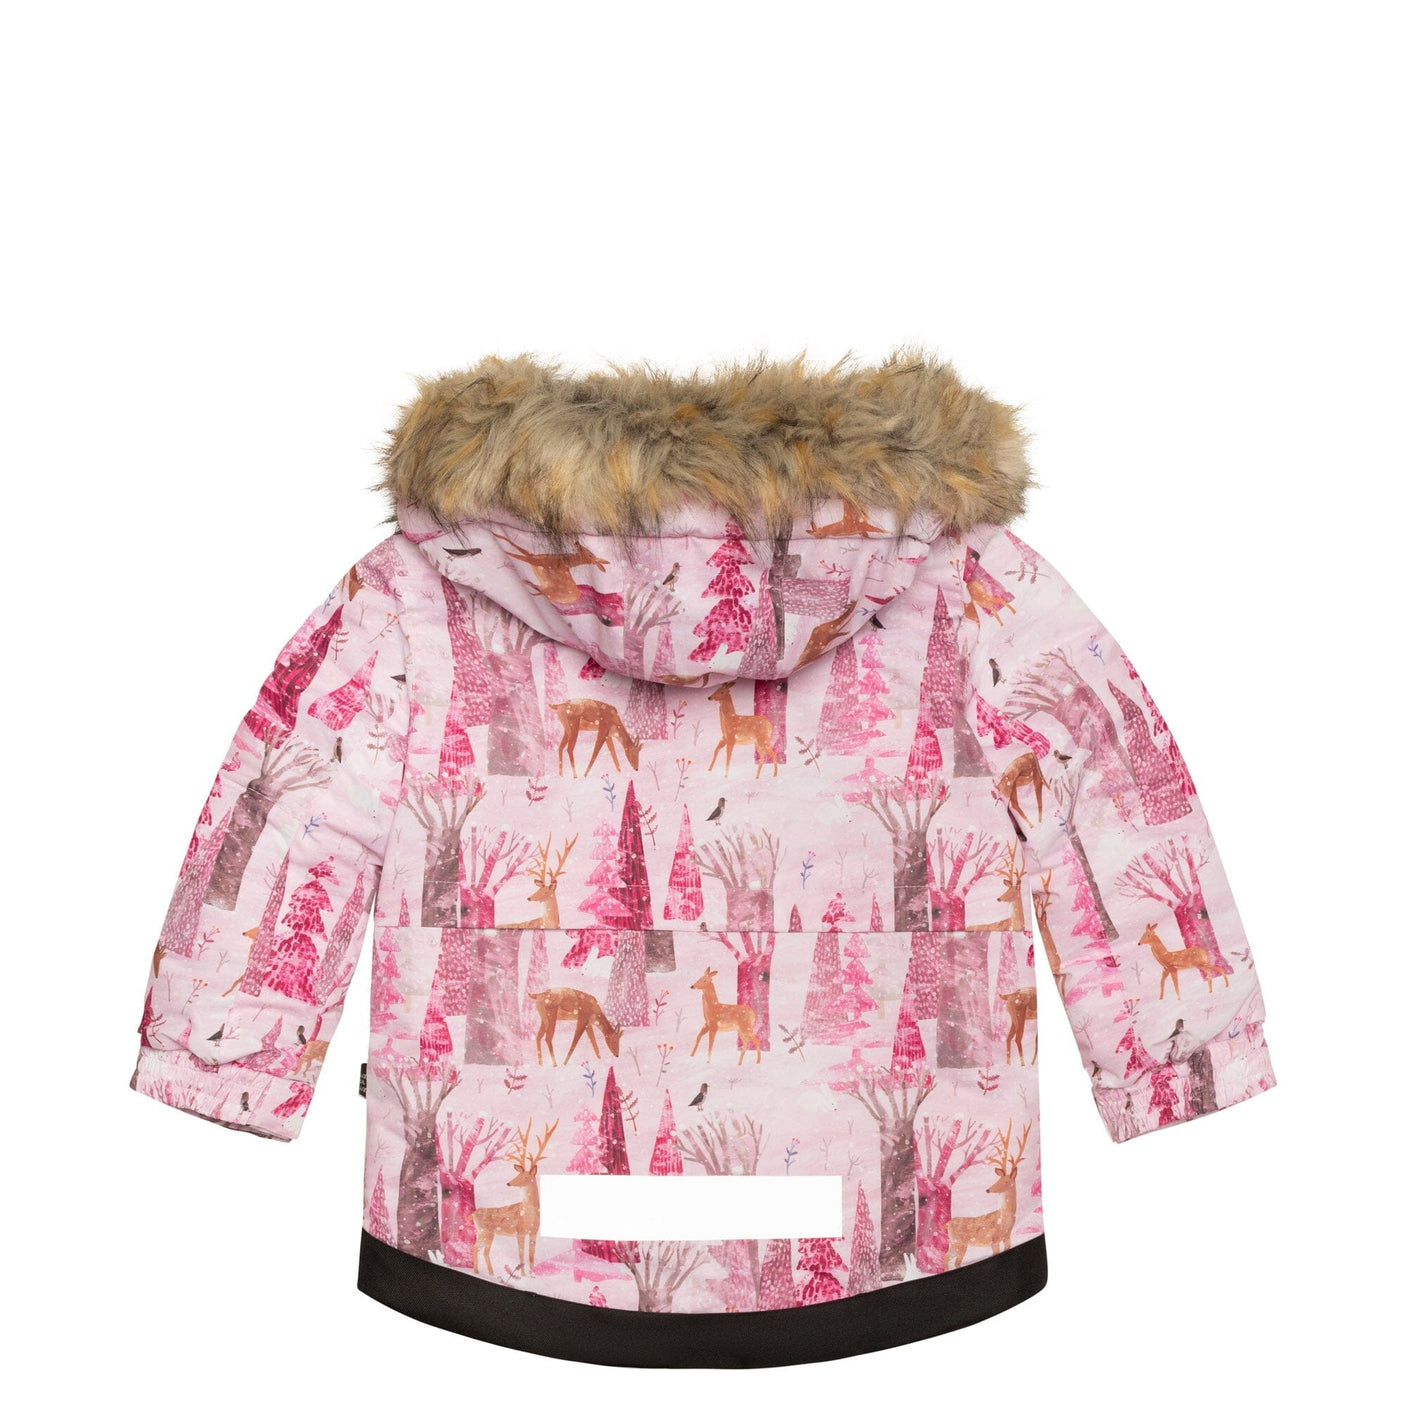 Two Piece Snowsuit Fuchsia With Snowy Forest Print-3